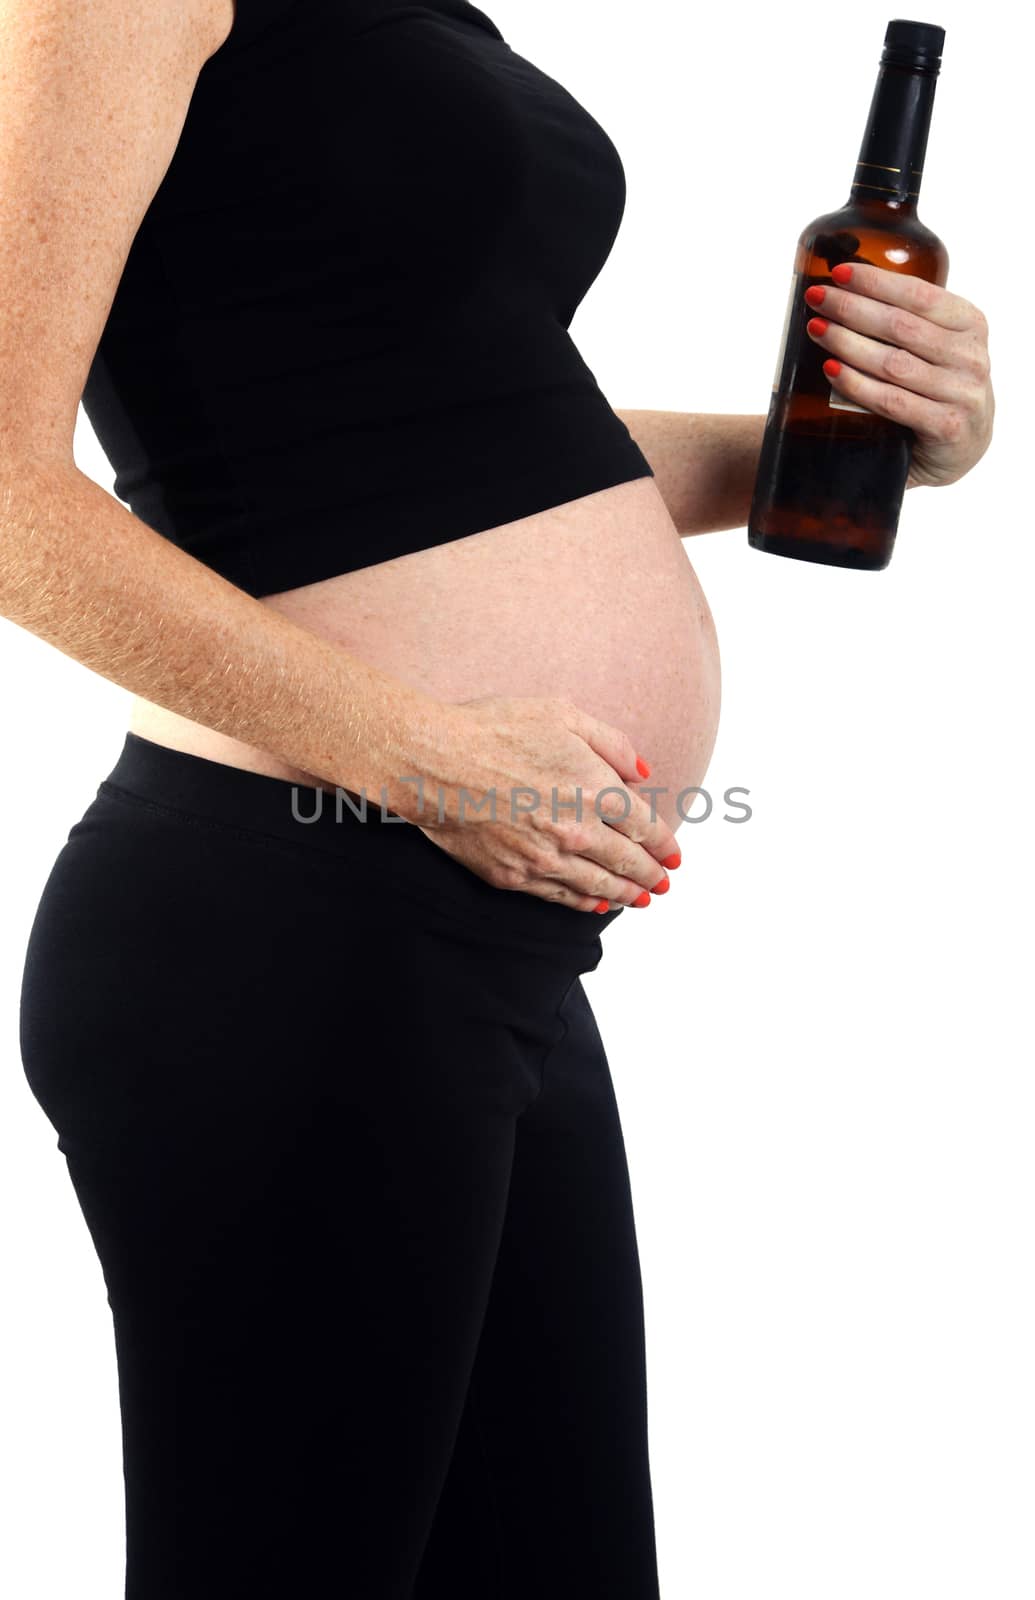 drinking alcohol during pregnancy and alcoholism